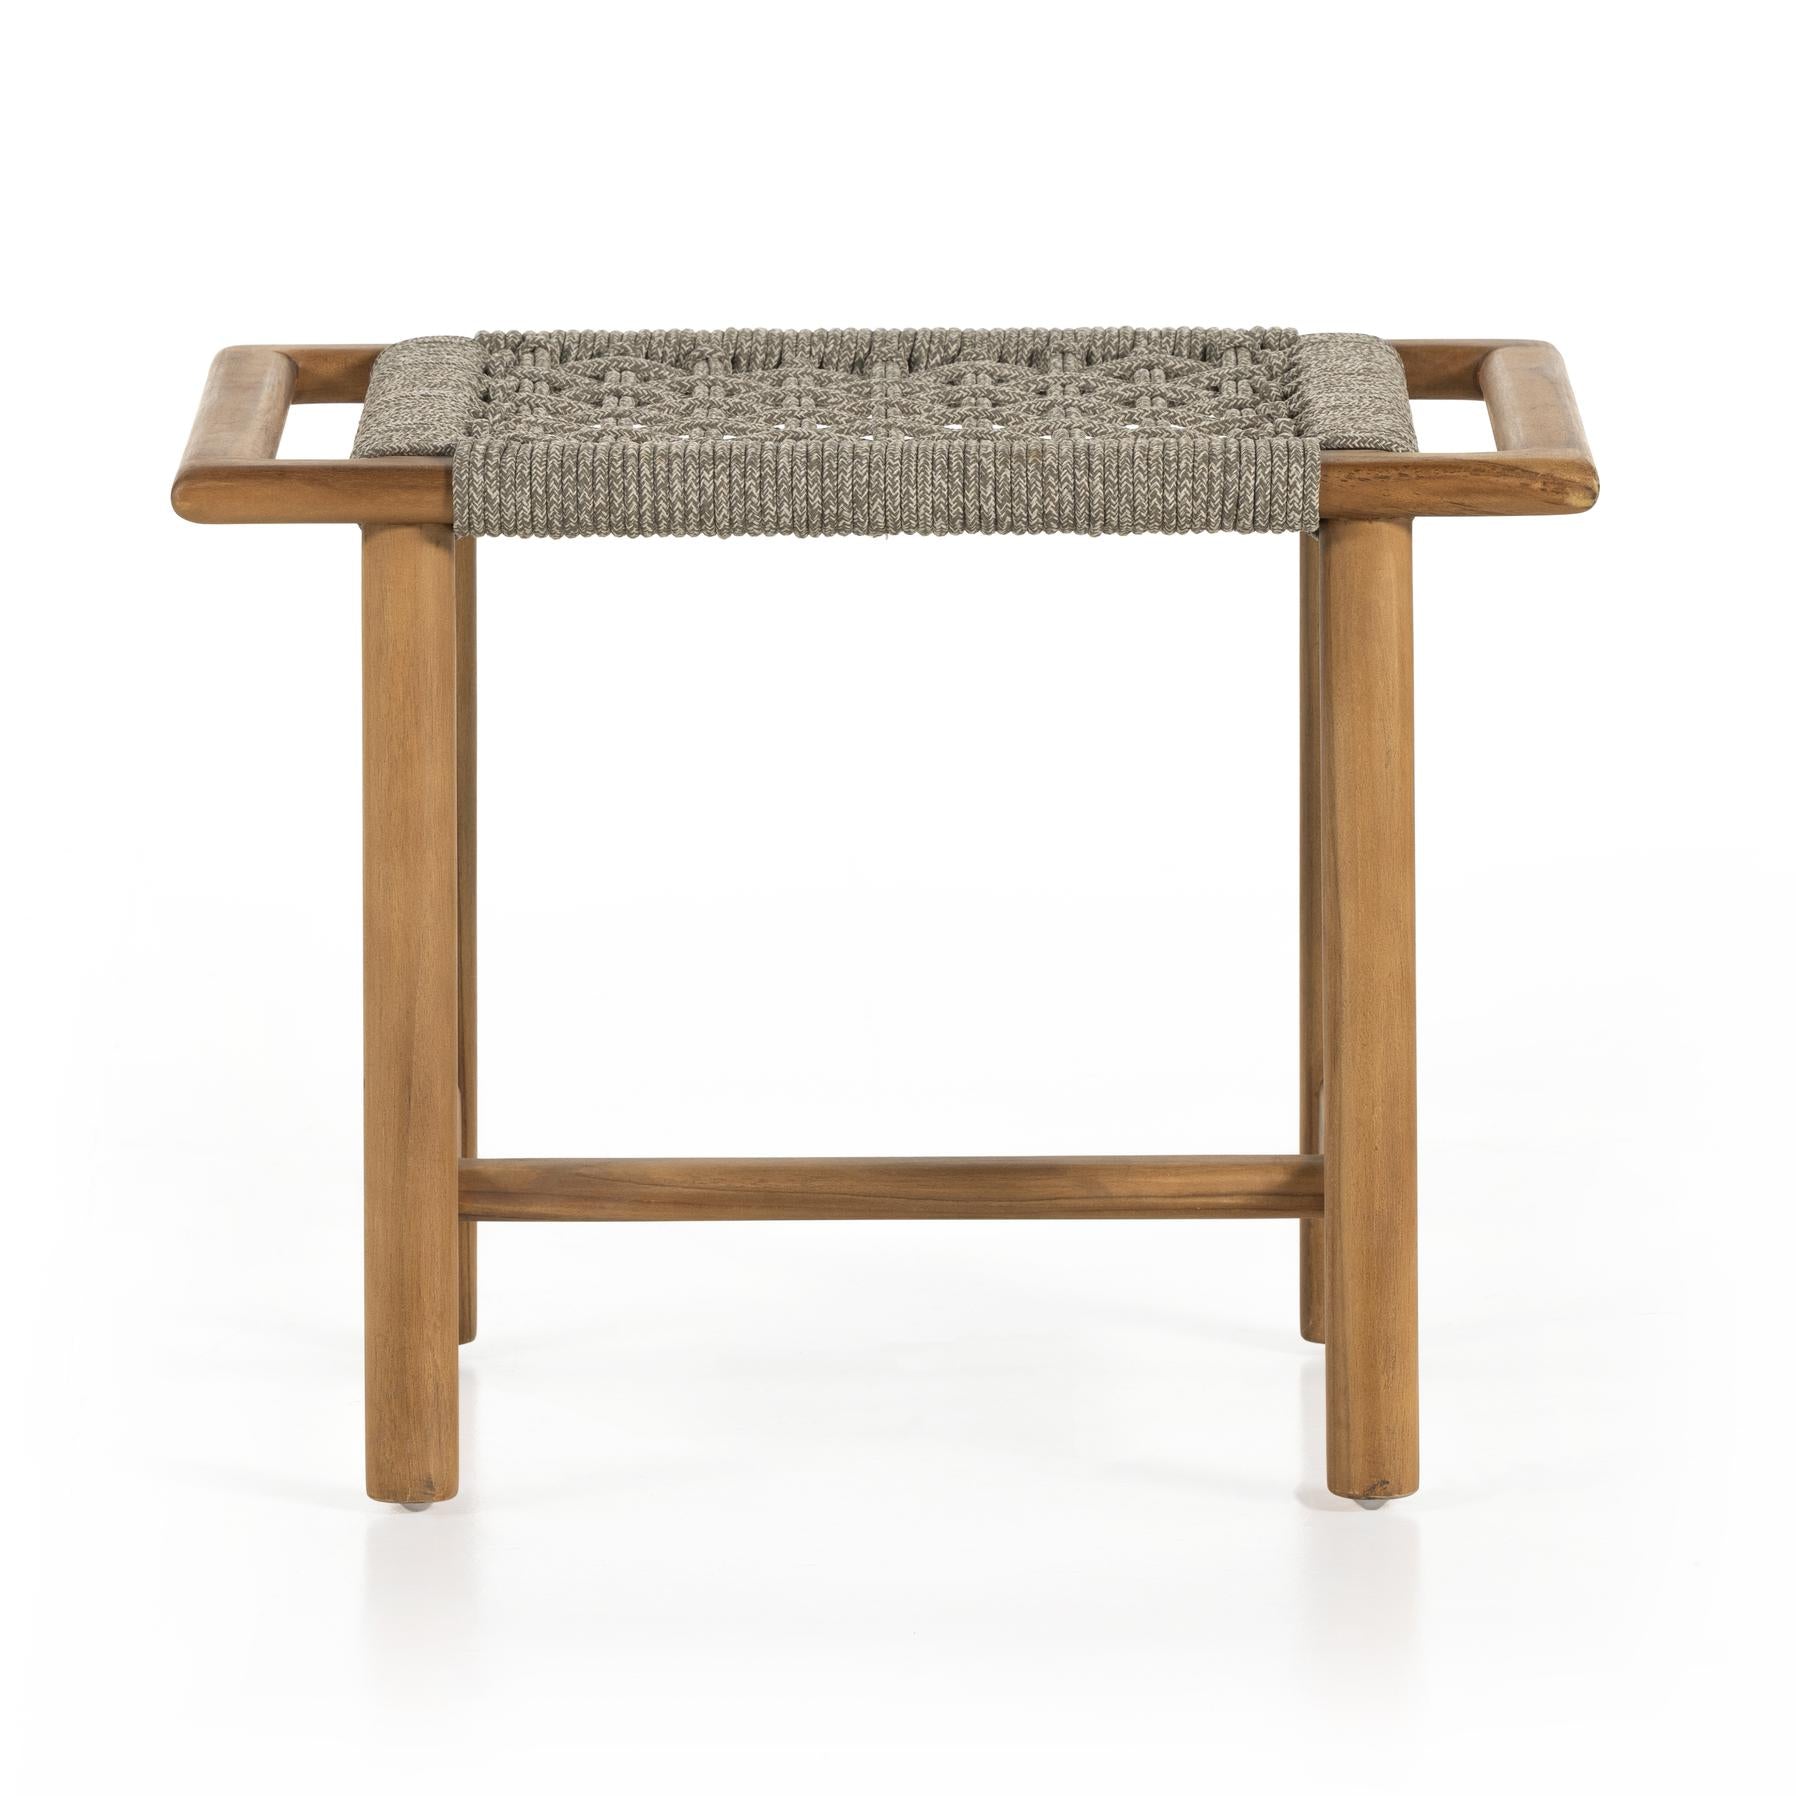 Phoebe Outdoor Accent Bench